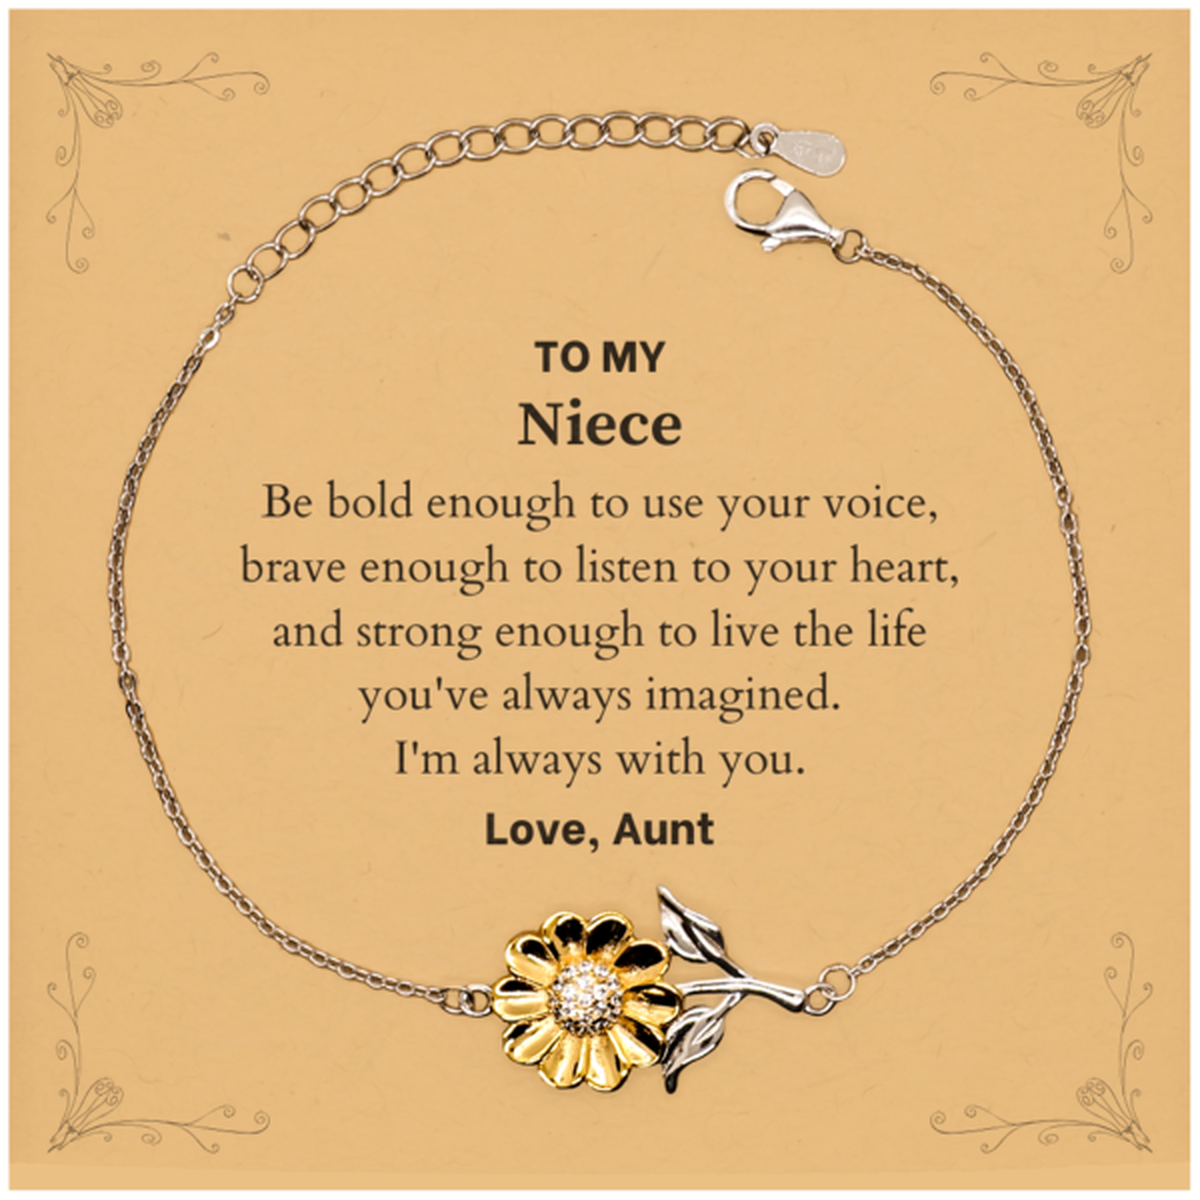 Keepsake Niece Sunflower Bracelet Gift Idea Graduation Christmas Birthday Niece from Aunt, Niece Be bold enough to use your voice, brave enough to listen to your heart. Love, Aunt